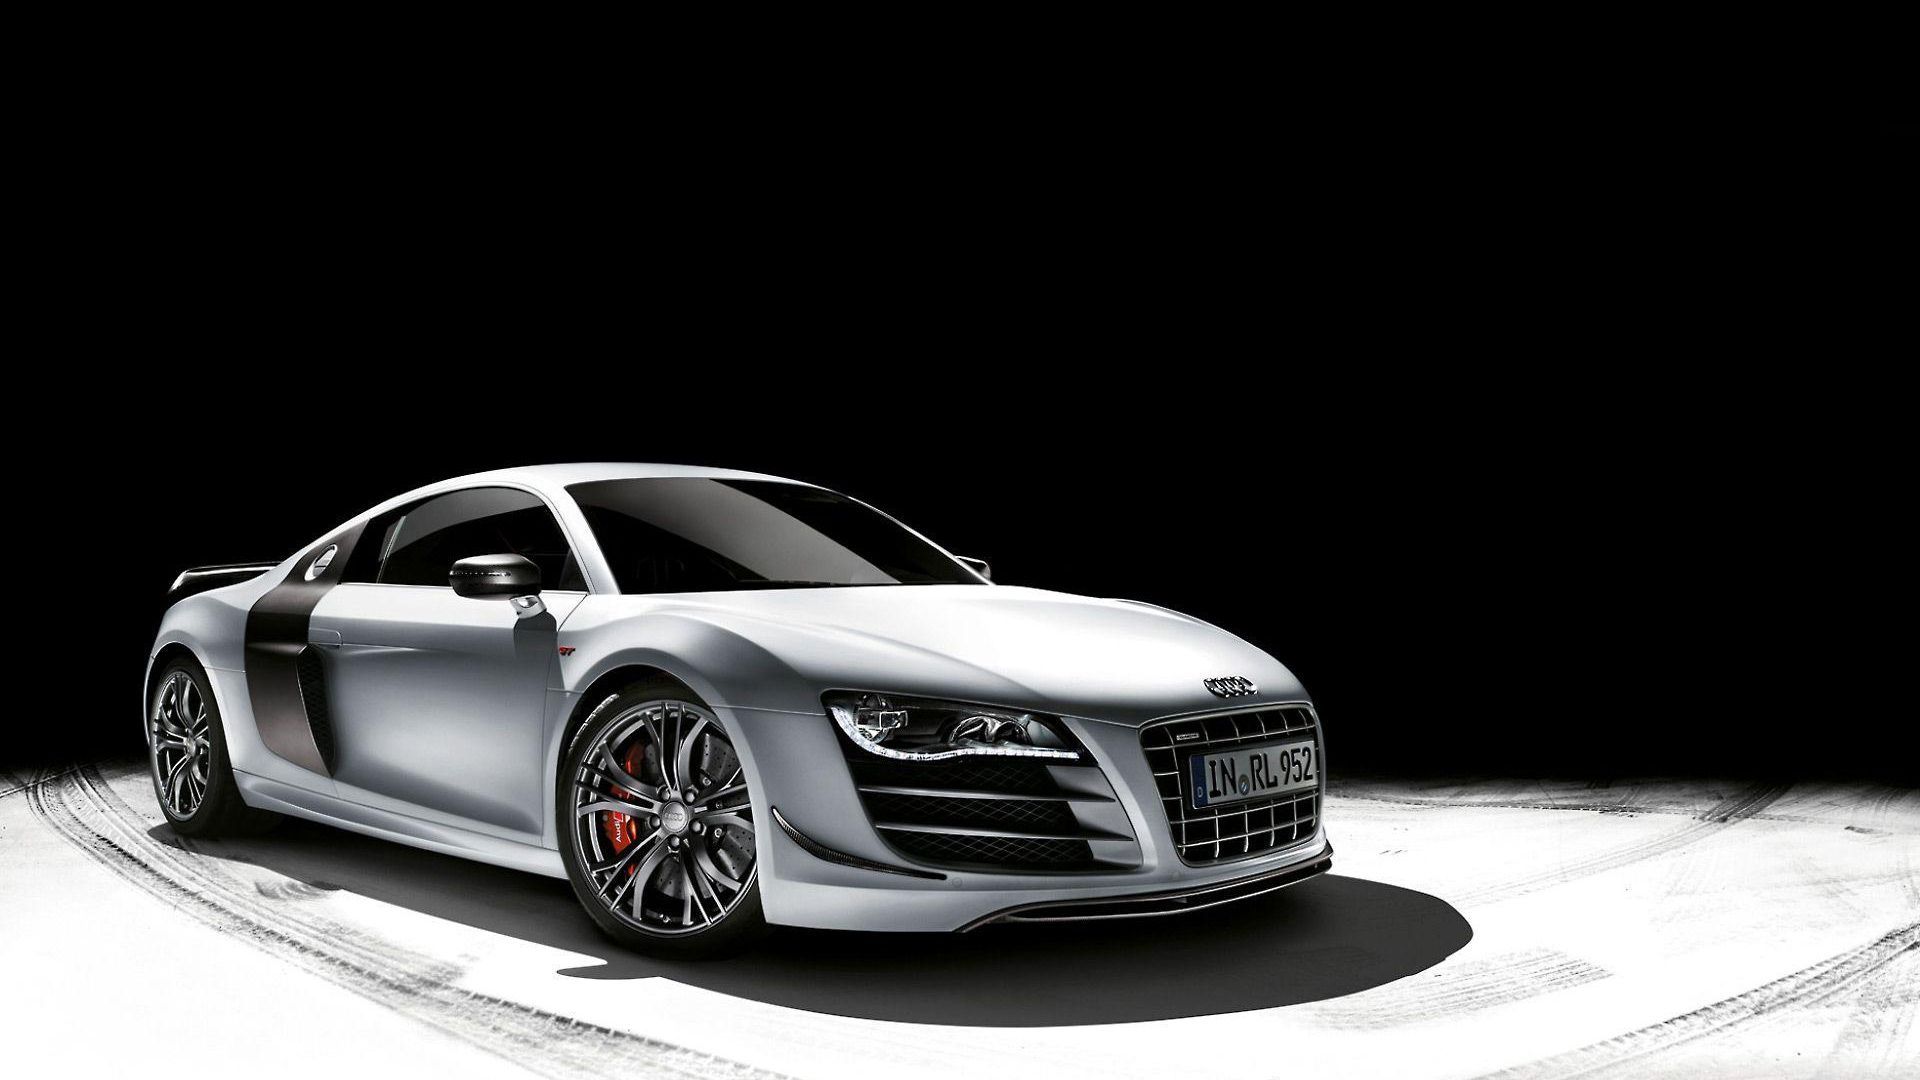 Audi R8 GT2 Wallpapers HD Backgrounds